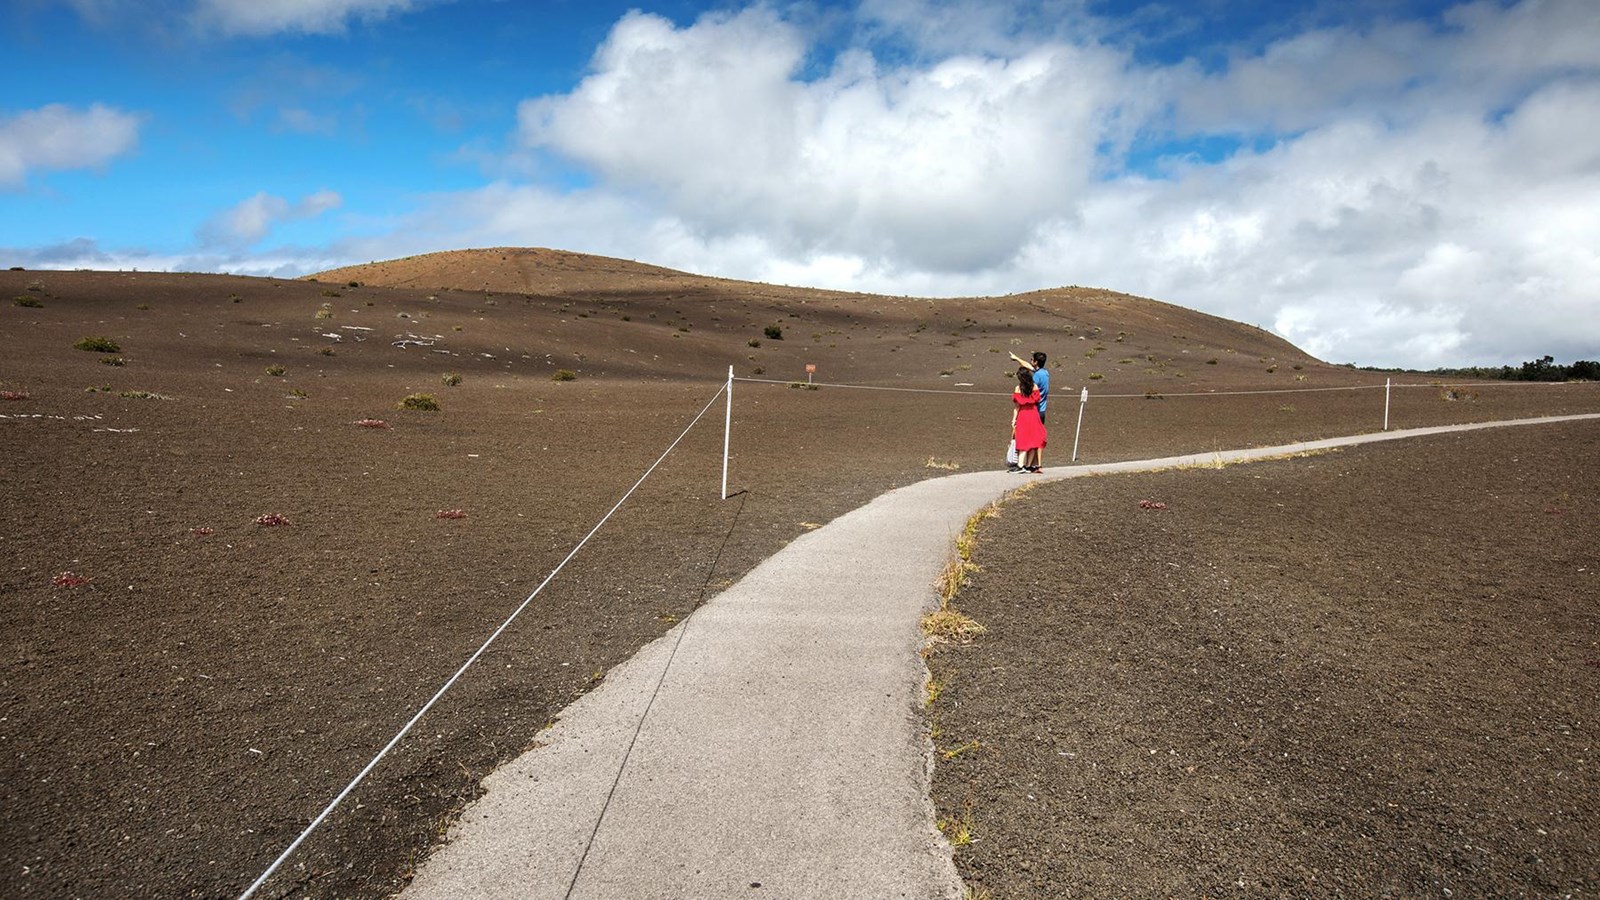 A man and woman walking on a paved path through a barren landscape covered by cinders